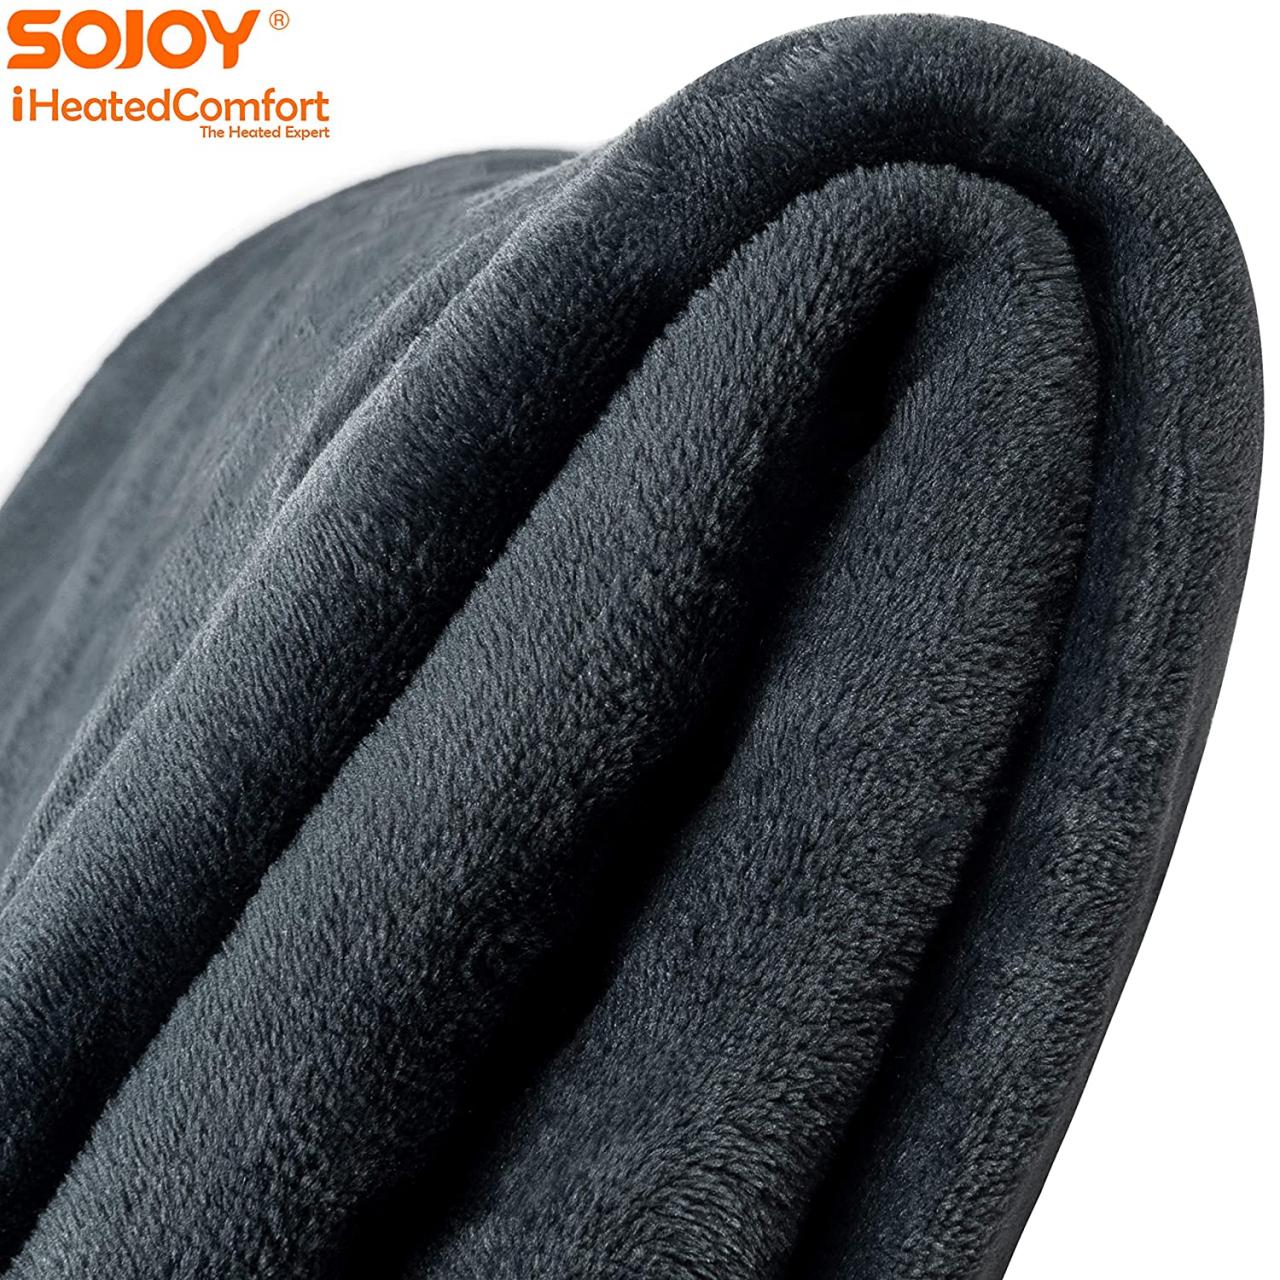 55x 40 Sojoy 12V Heated Travel Electric Blanket for Car Gray Boats or RV  with Smart Multifunctional High/Low Temp Control Truck Interior Accessories  Electrical Appliances apeur.eu